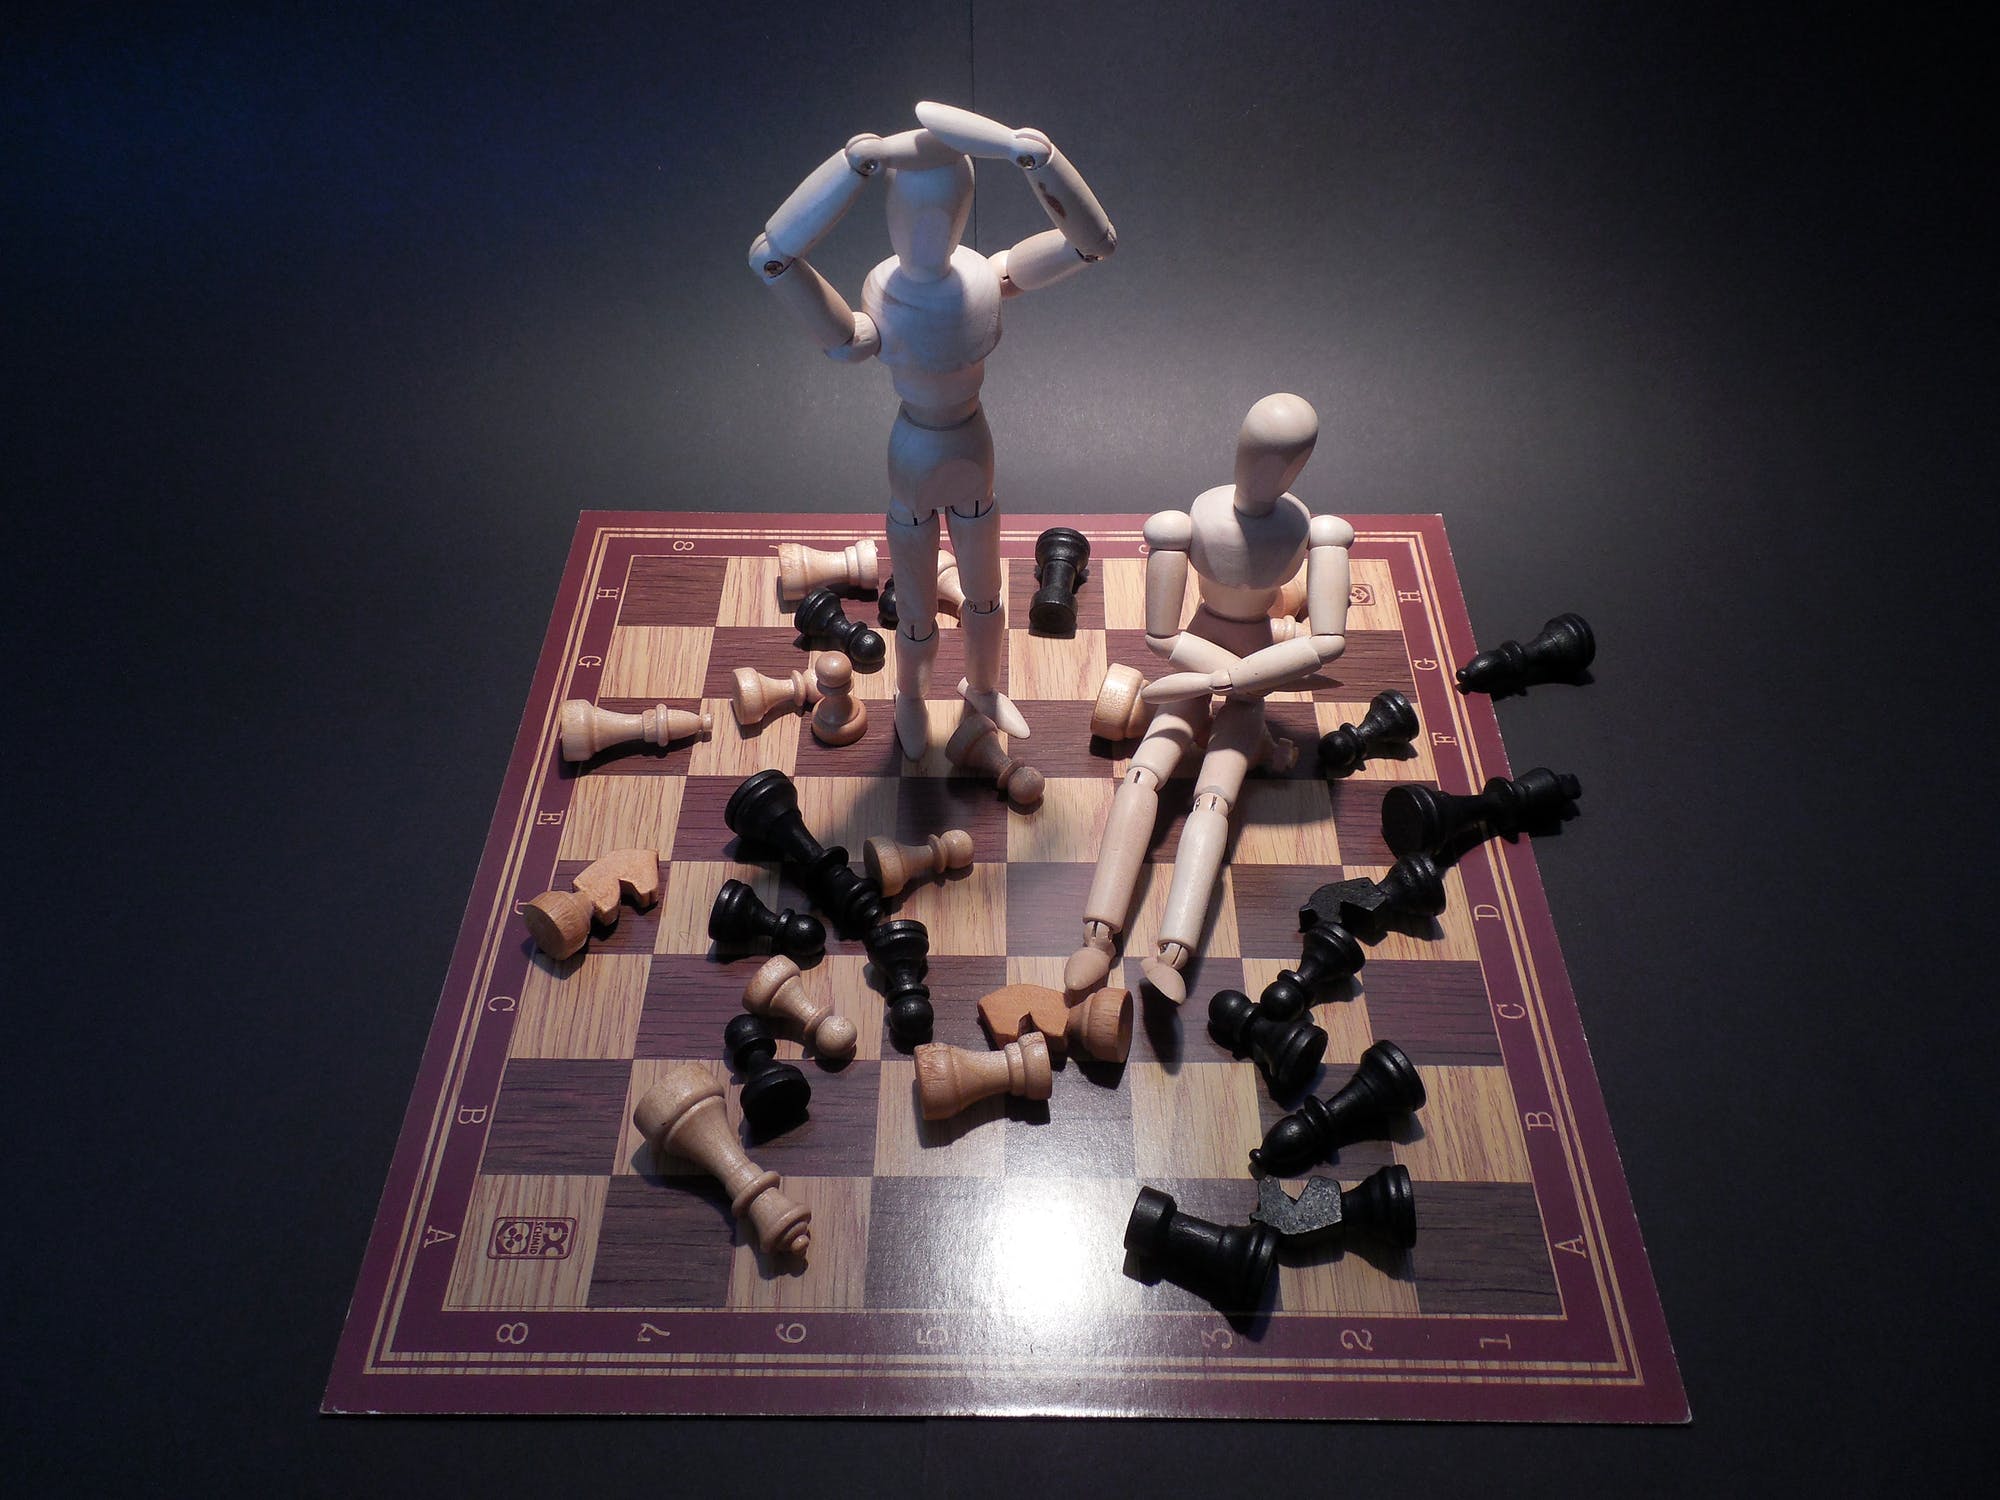 Human figures playing chess on a chess board.